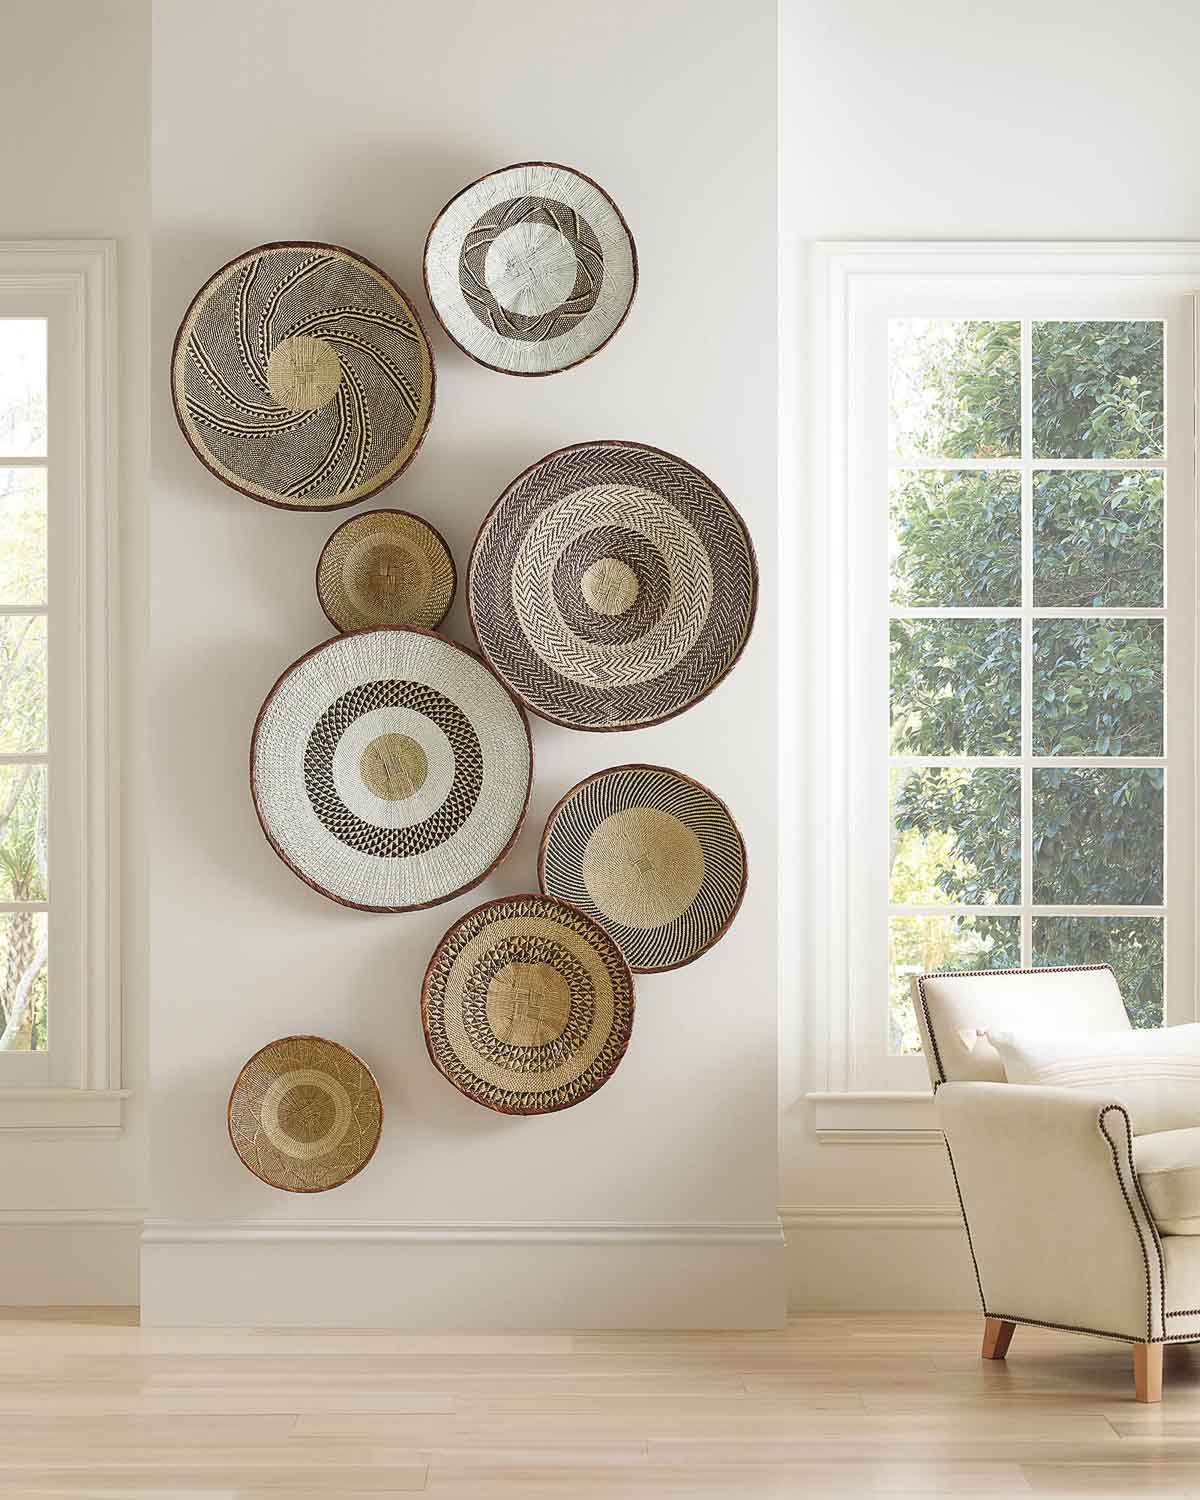 Wall baskets as dining room wall decor